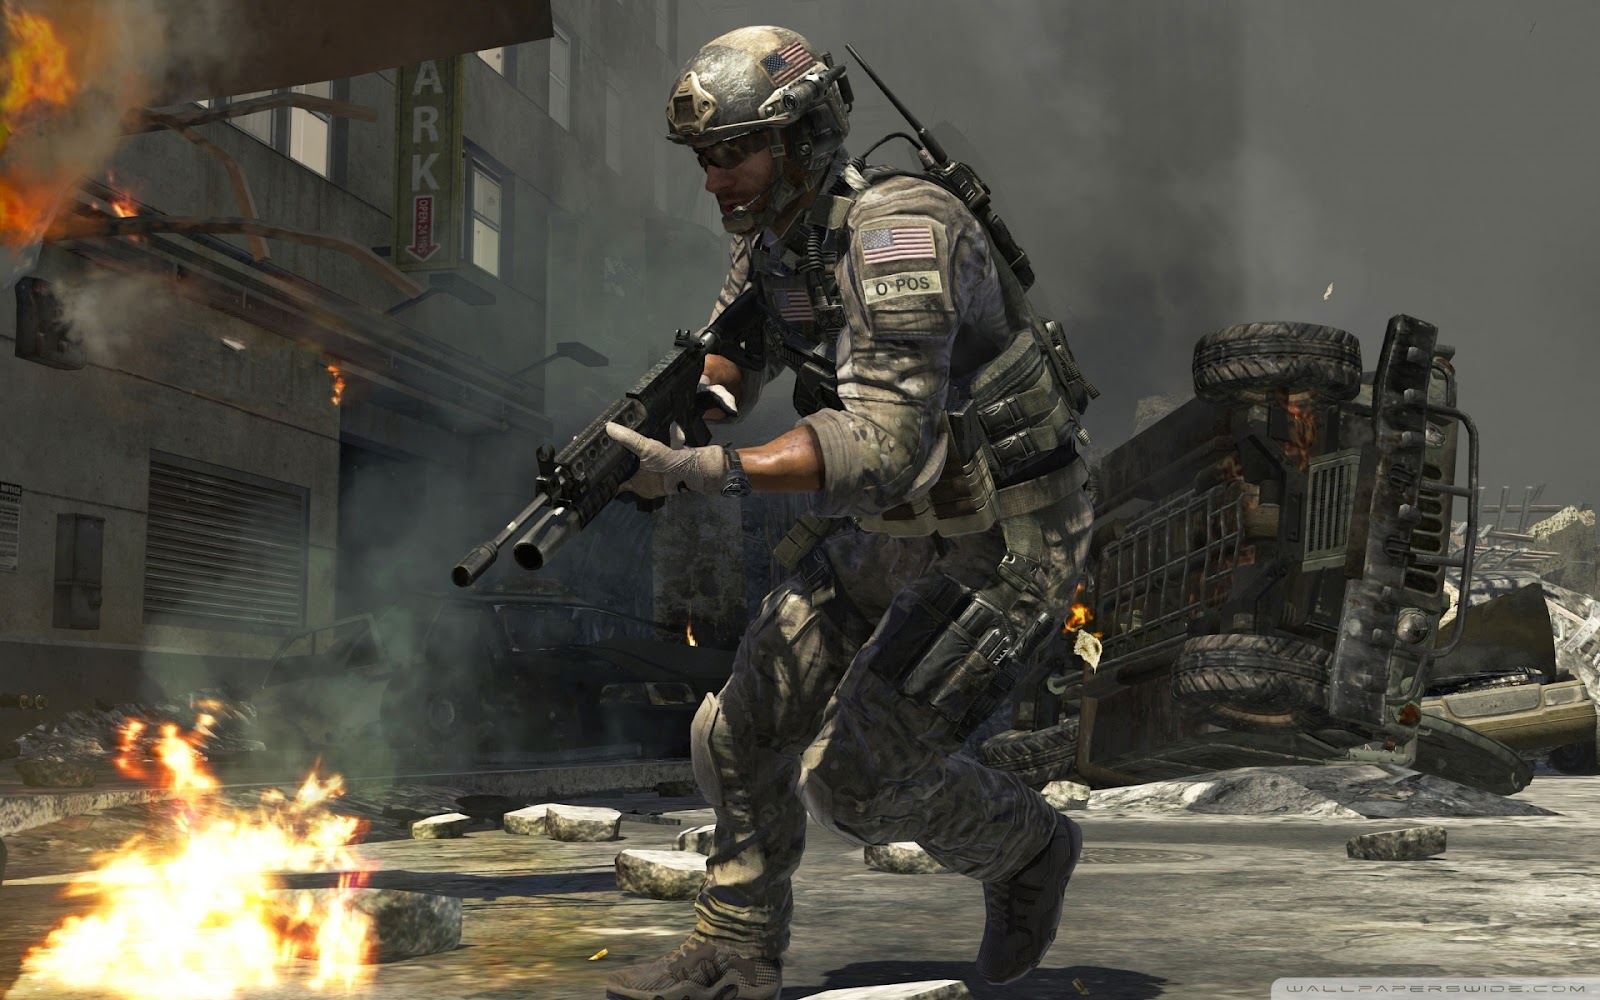 call of duty hd wallpapers 1080p,action adventure game,shooter game,pc game,troop,soldier